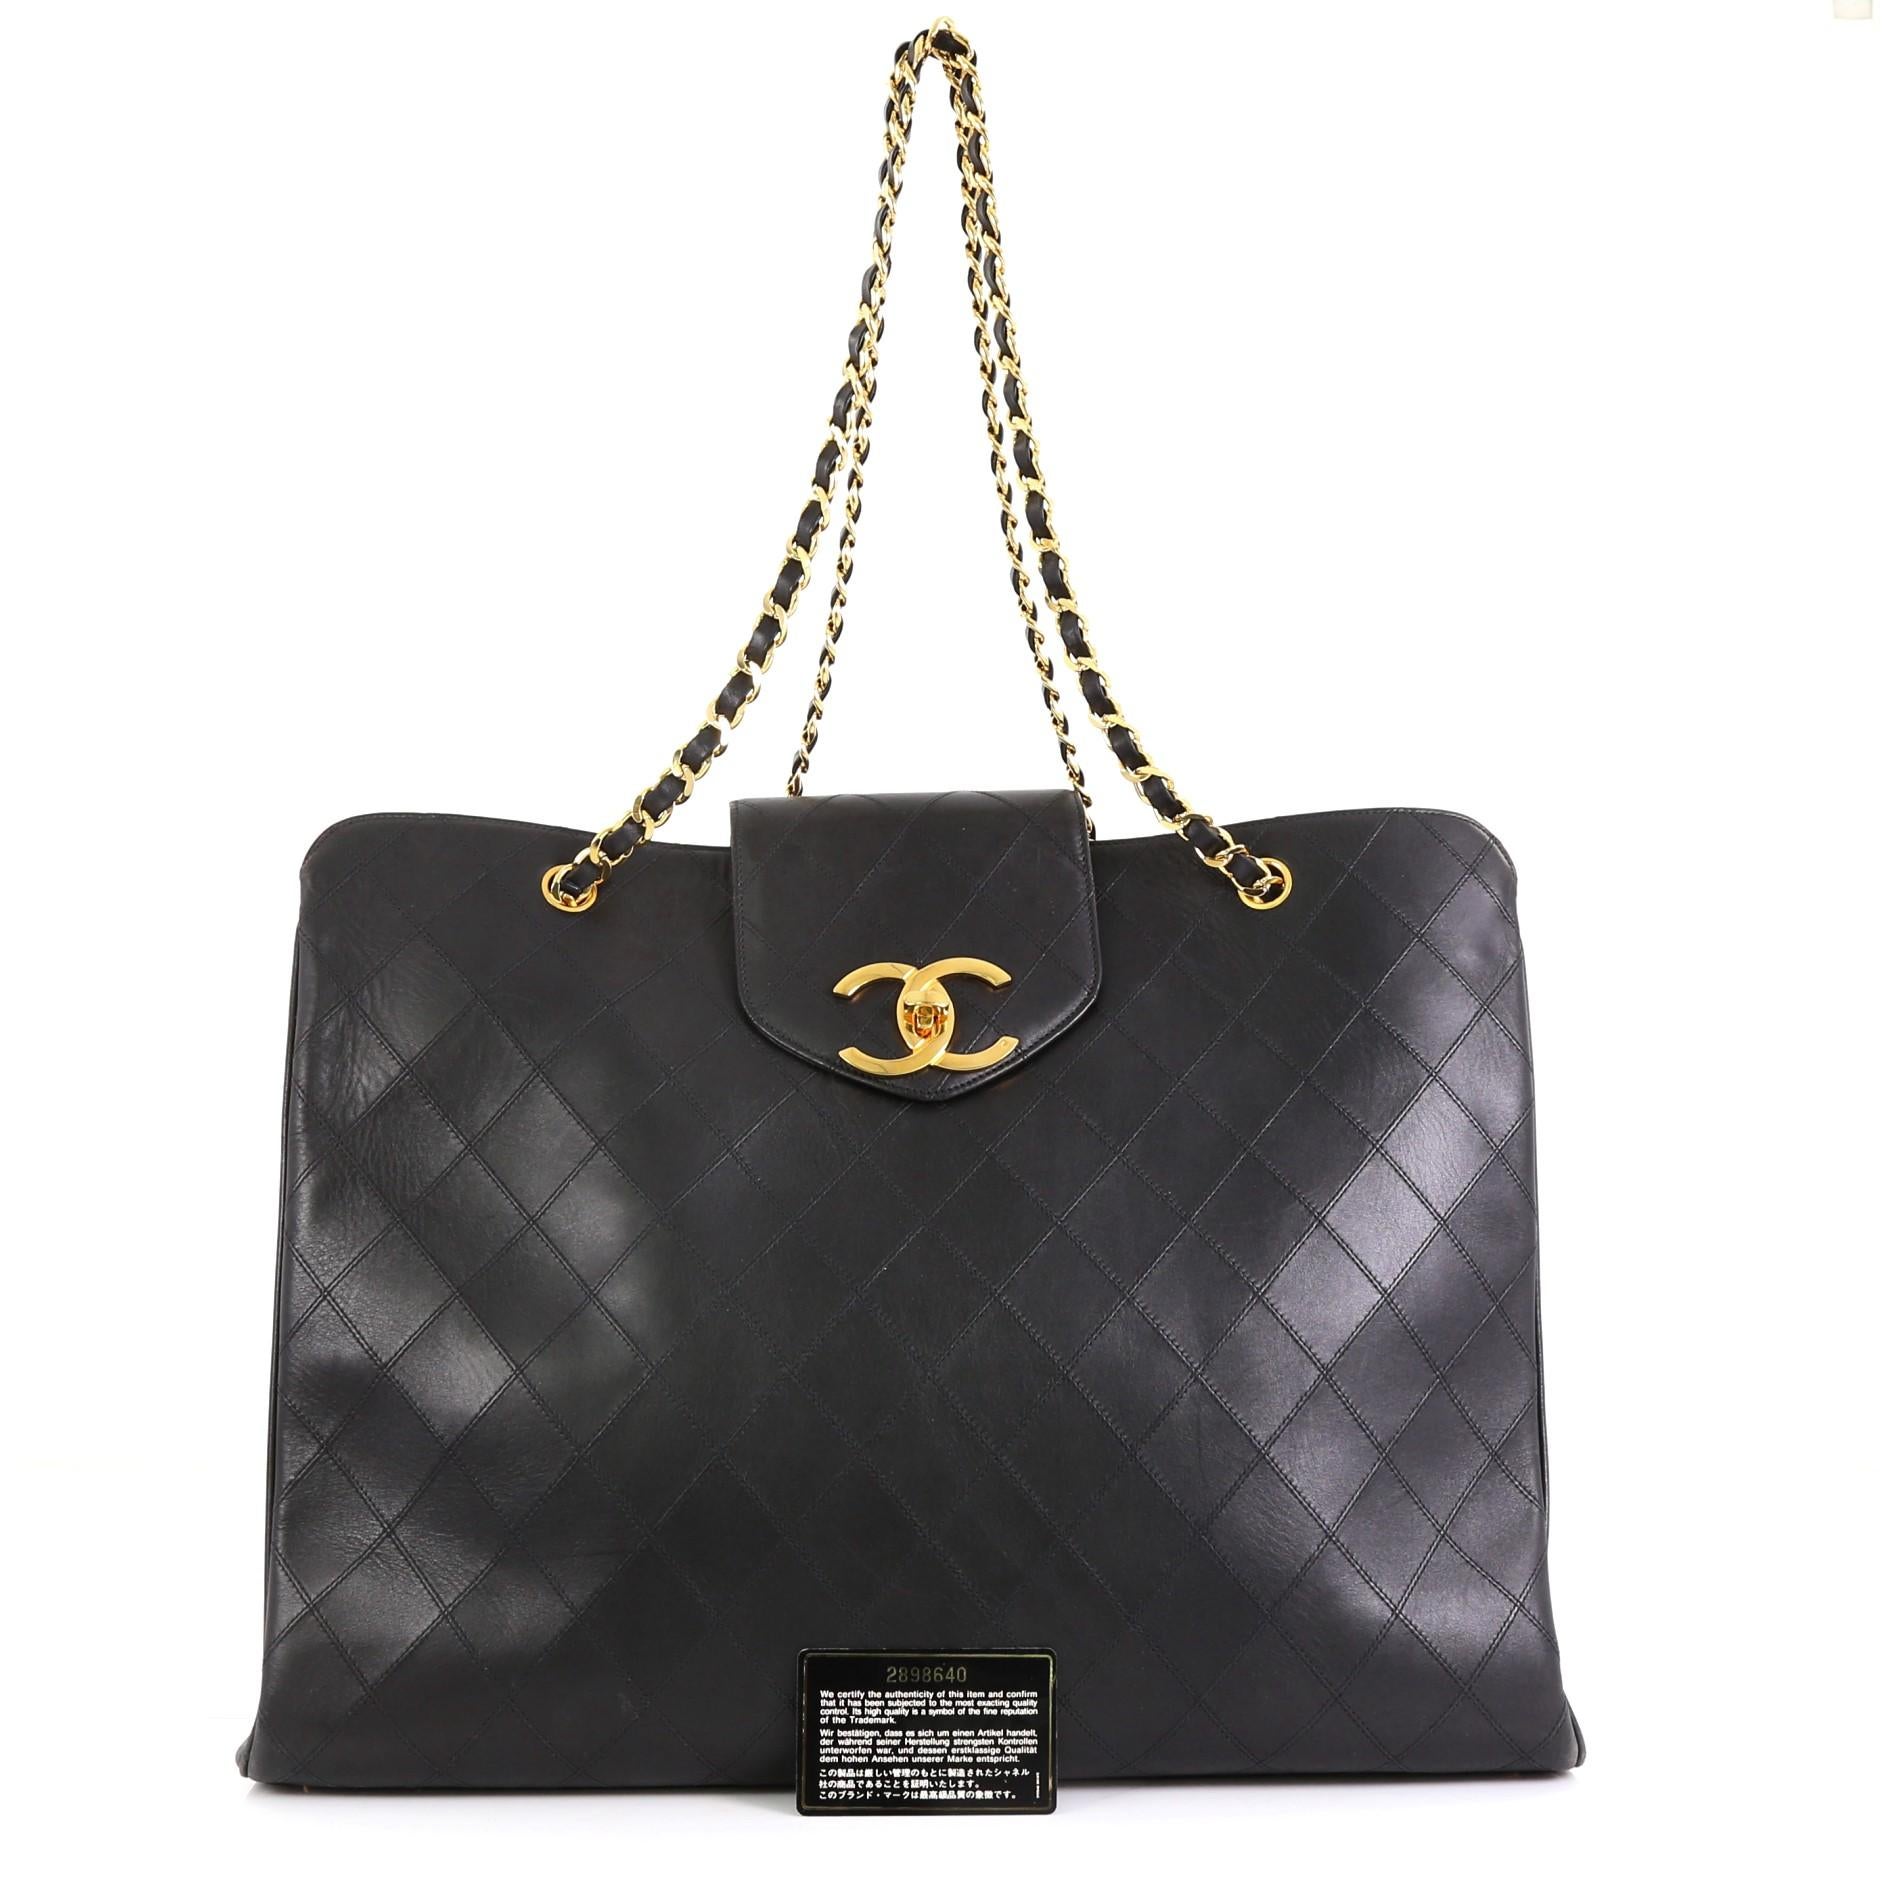 This Chanel Vintage Supermodel Weekender Bag Quilted Leather Large, crafted in black quilted leather, features dual woven-in leather chain straps, flap tab with turn-lock closure, and gold-tone hardware. Its zip closure opens to a black leather